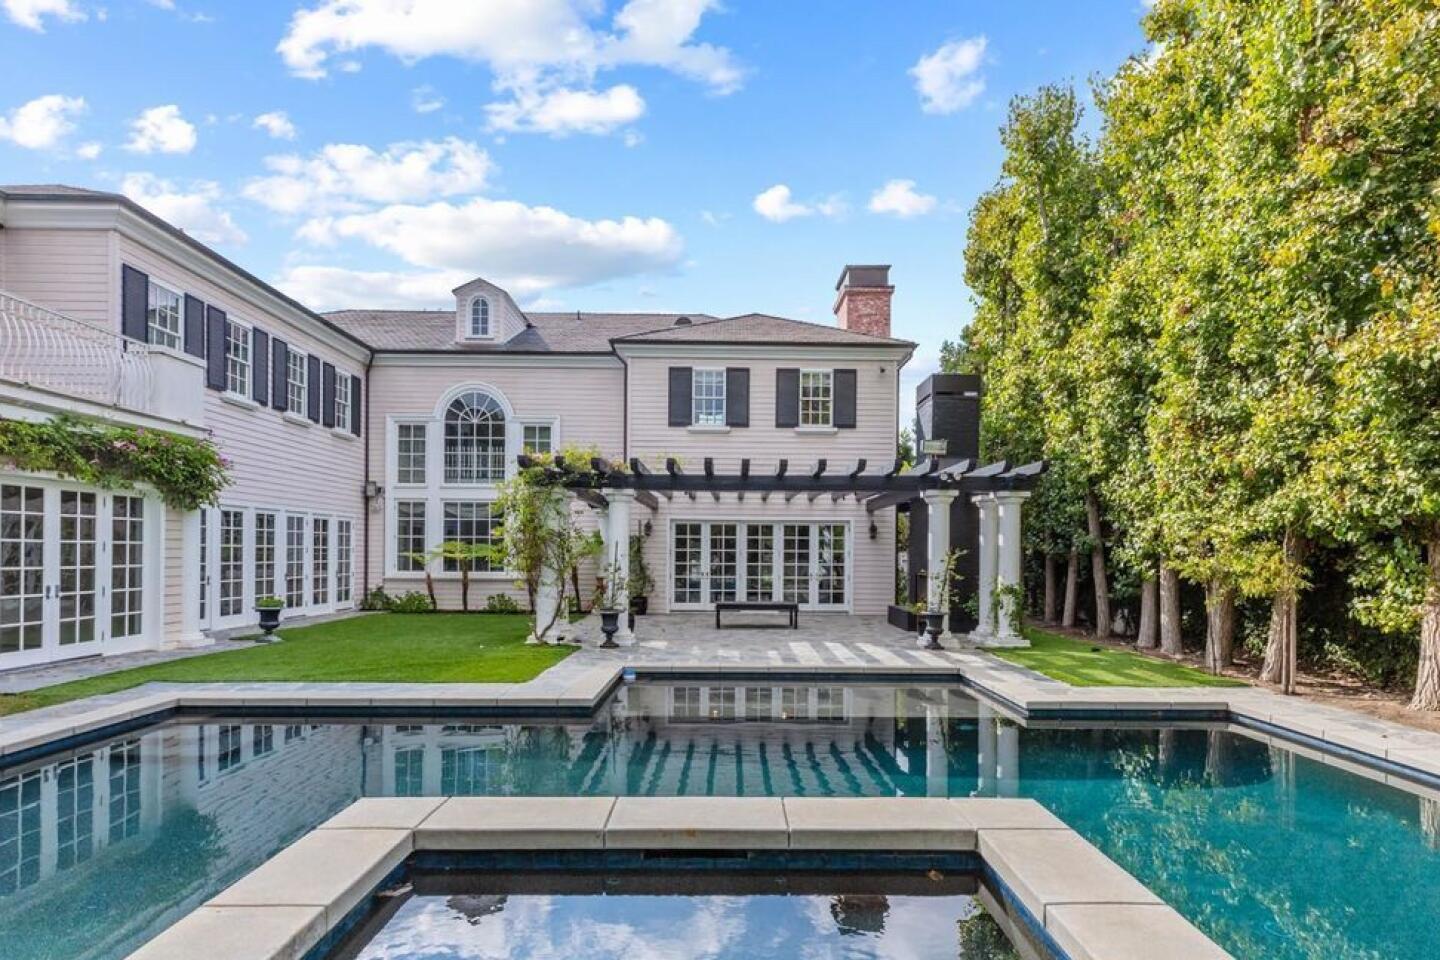 Diddy sells his Toluca Lake mansion for $6.5 million - Los Angeles Times